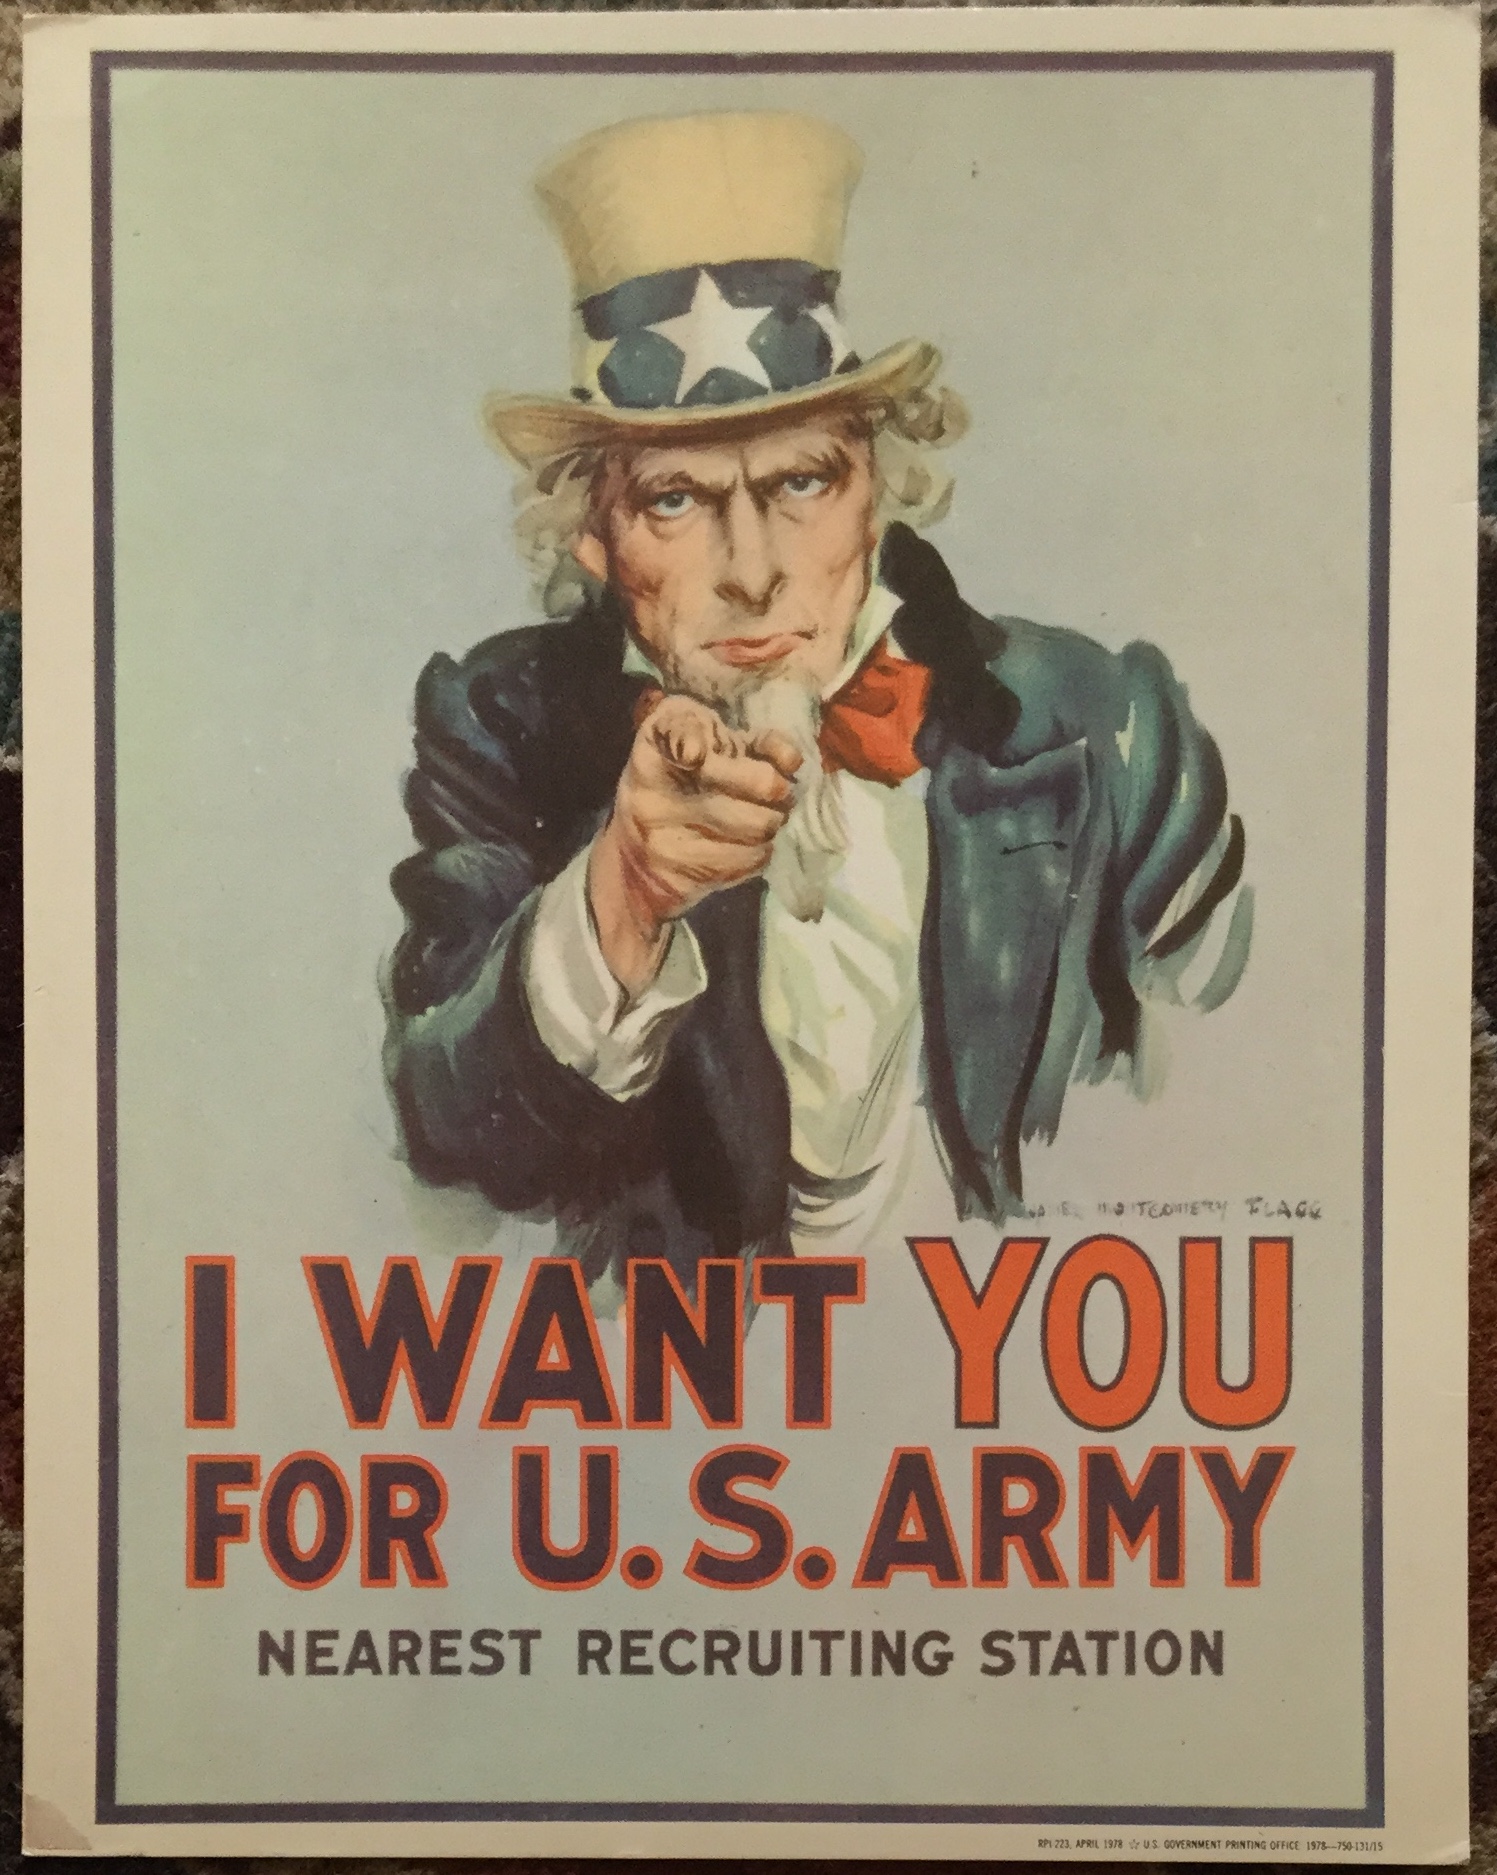 J549	I WANT YOU FOR THE U.S. ARMY JAMES MONTGOMMERY FLAGG PLACARD 1978 RECRUITING STATION POSTER